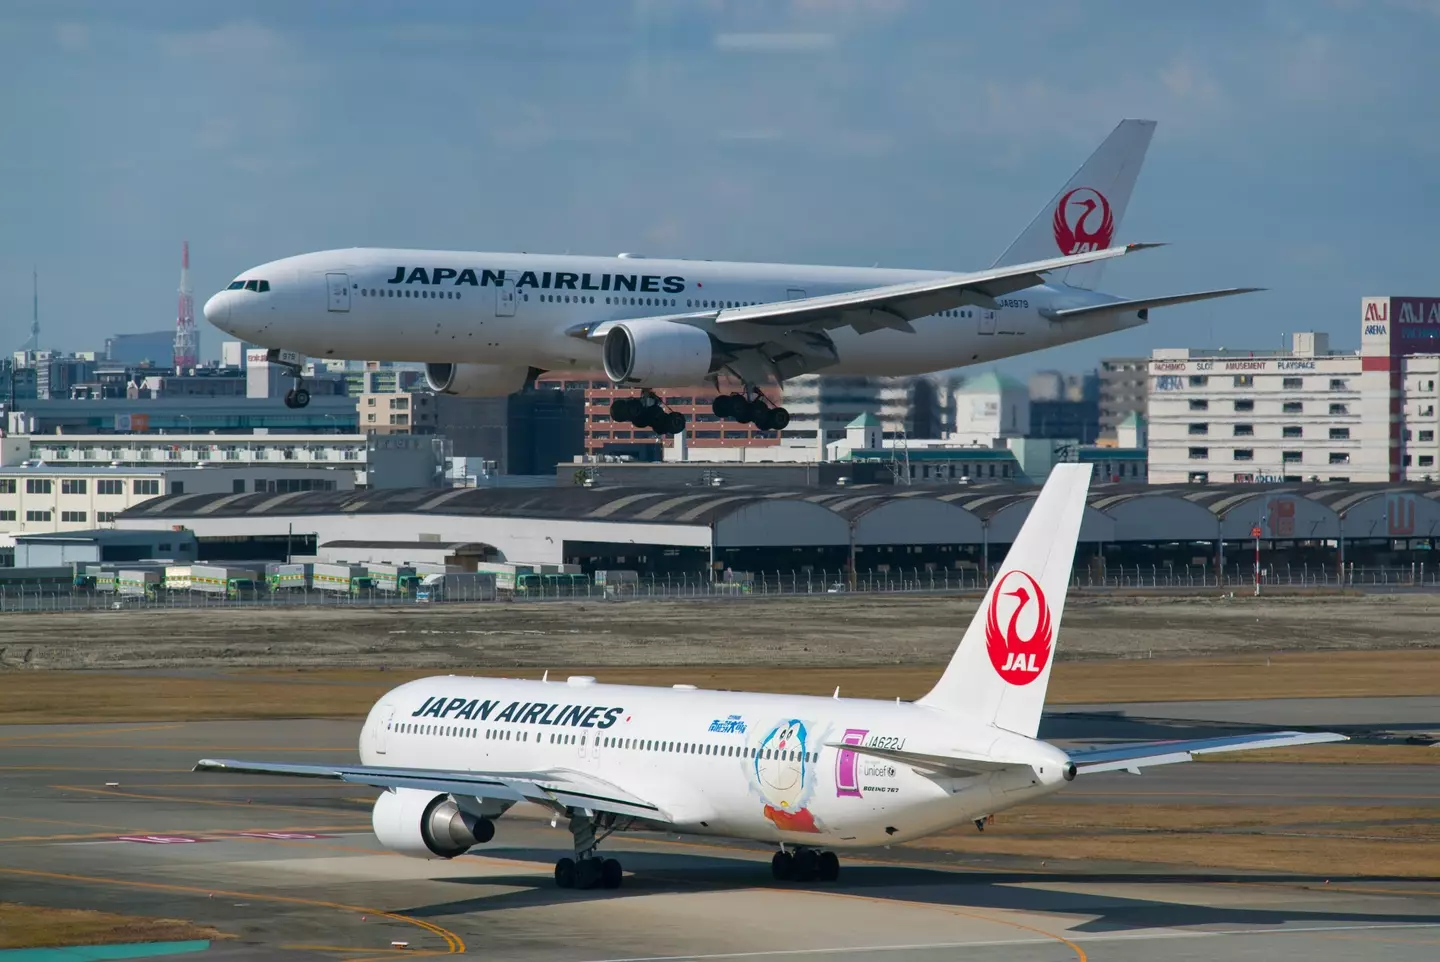 If you're on a Japan Airlines flight you can now decide to ditch your in-flight meal.